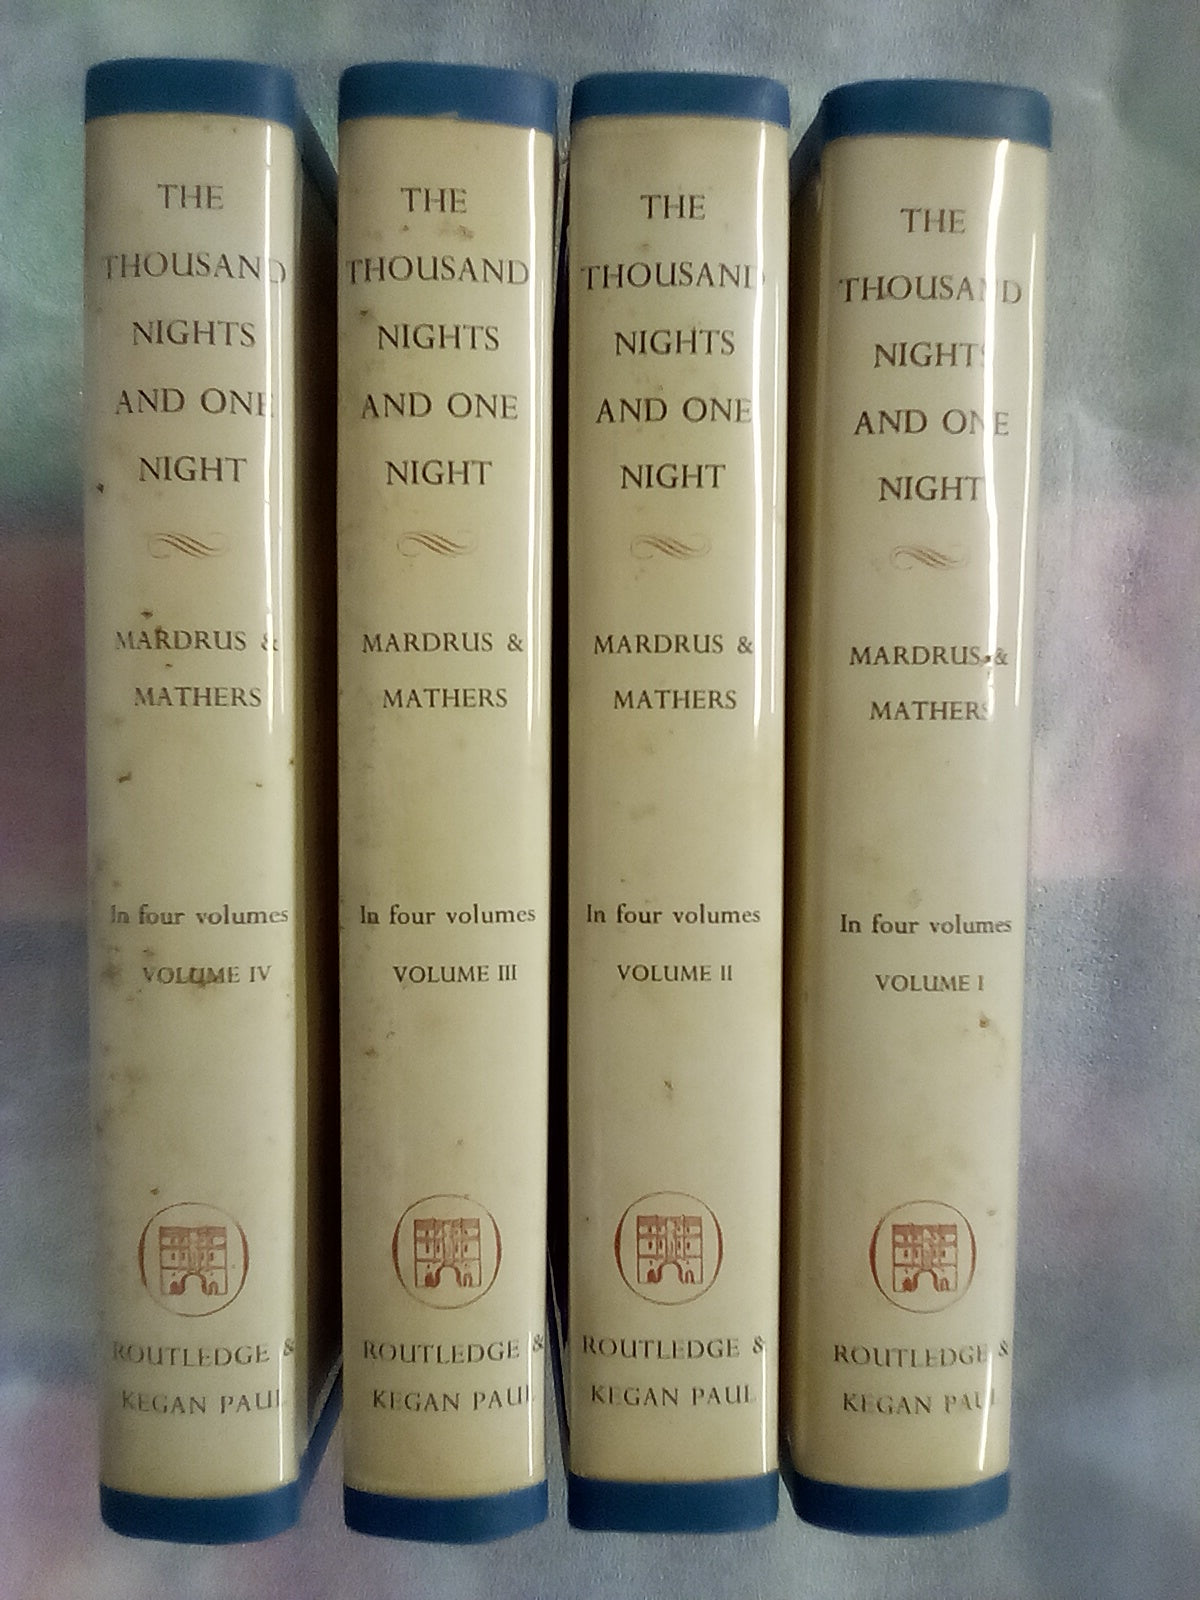 The Book of The Thousand Nights & One Night - 4 Volumes (1964)